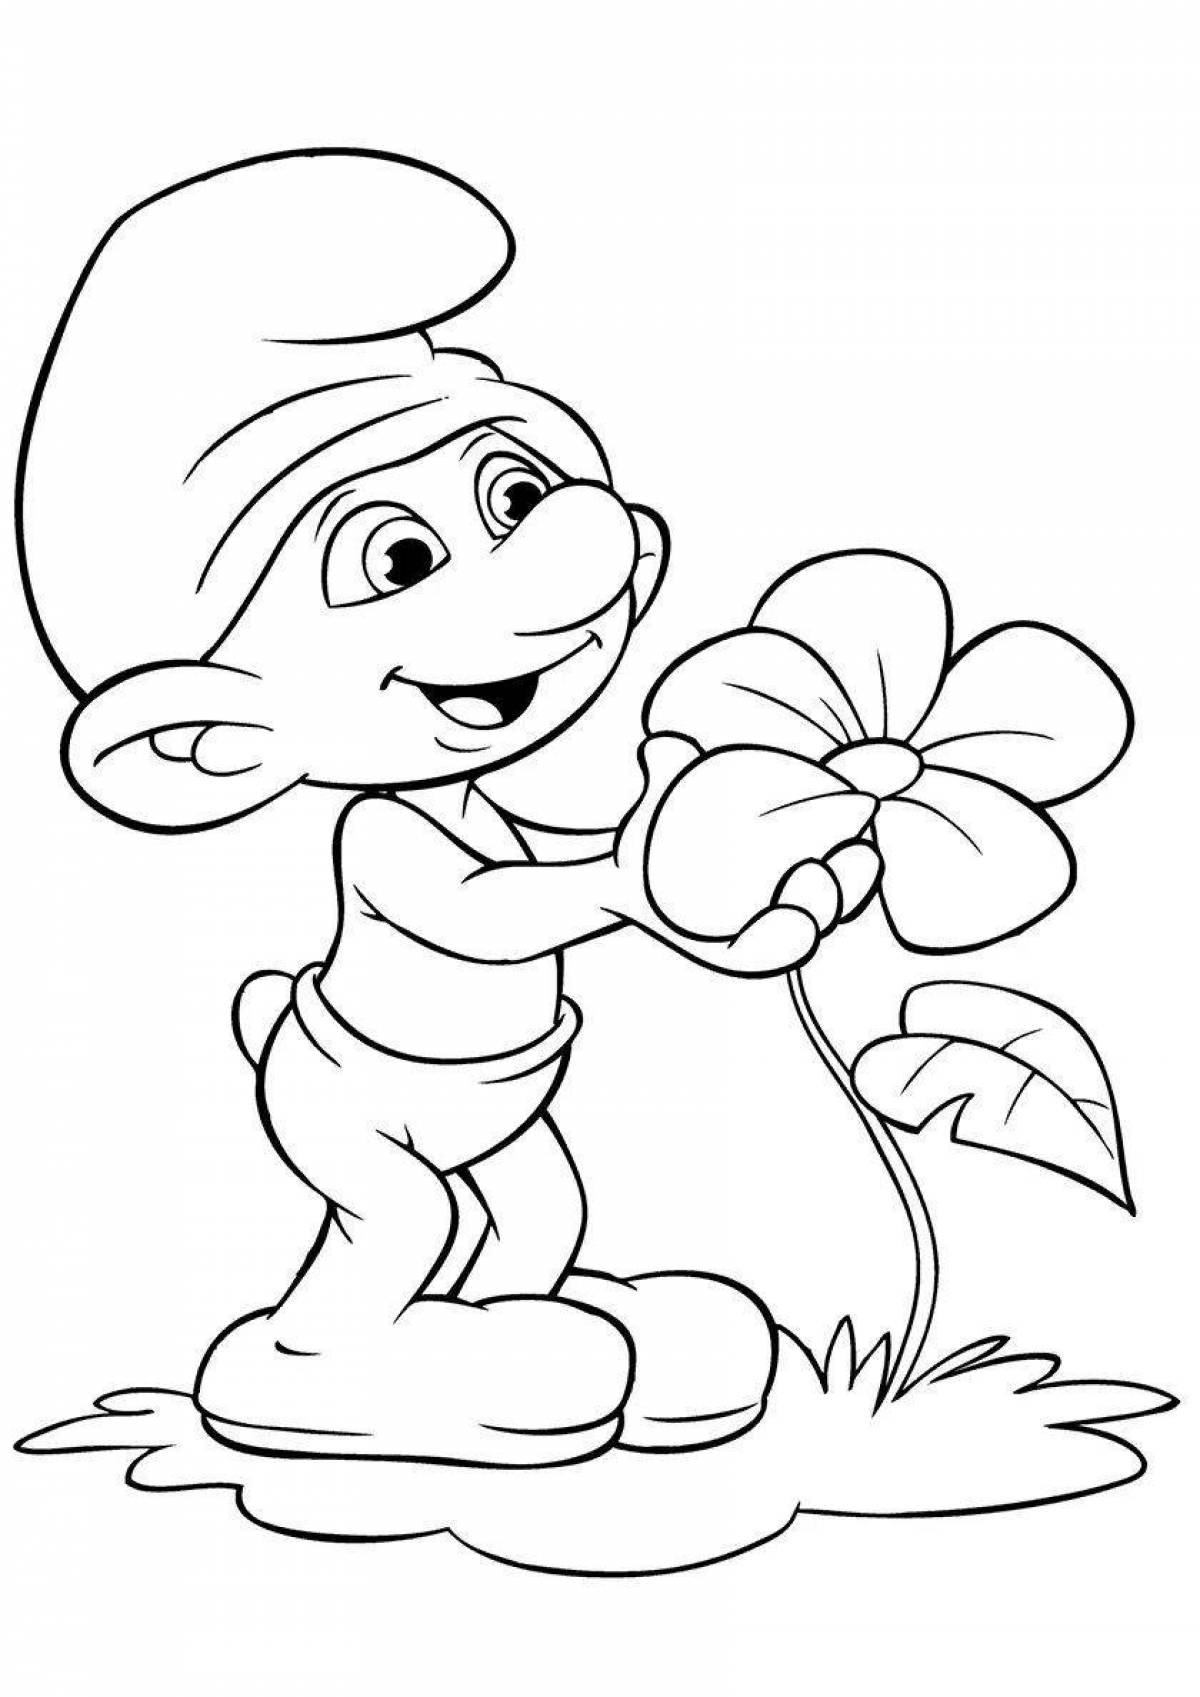 Distinctive coloring pages good image quality